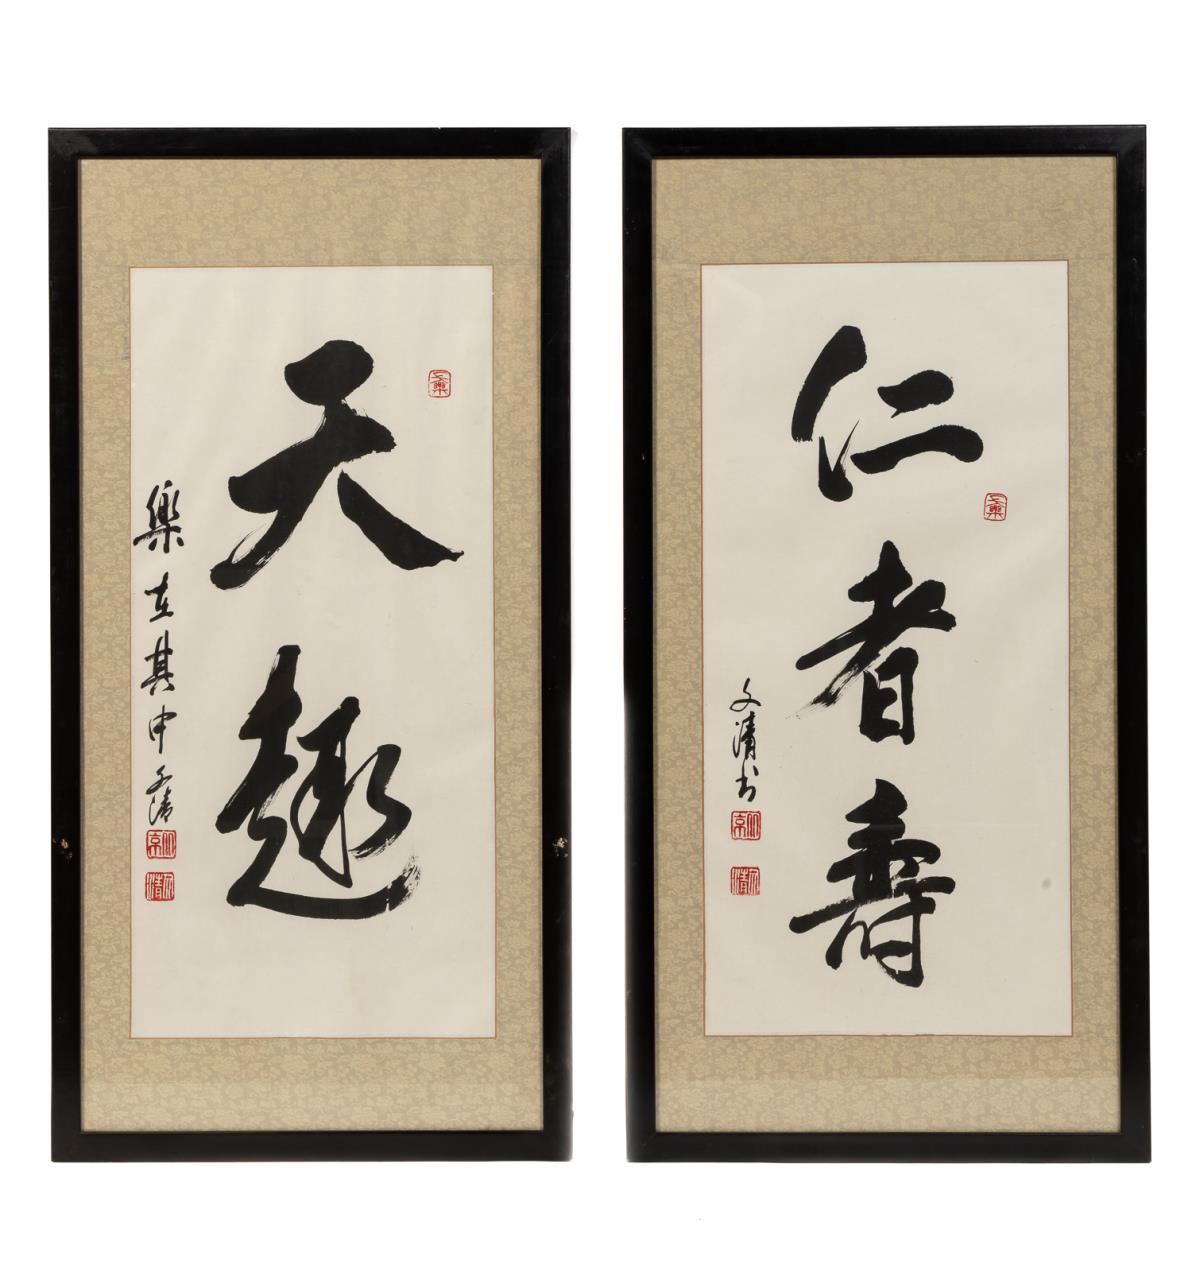 PAIR CHINESE CALLIGRAPHY SCROLLS  29f504